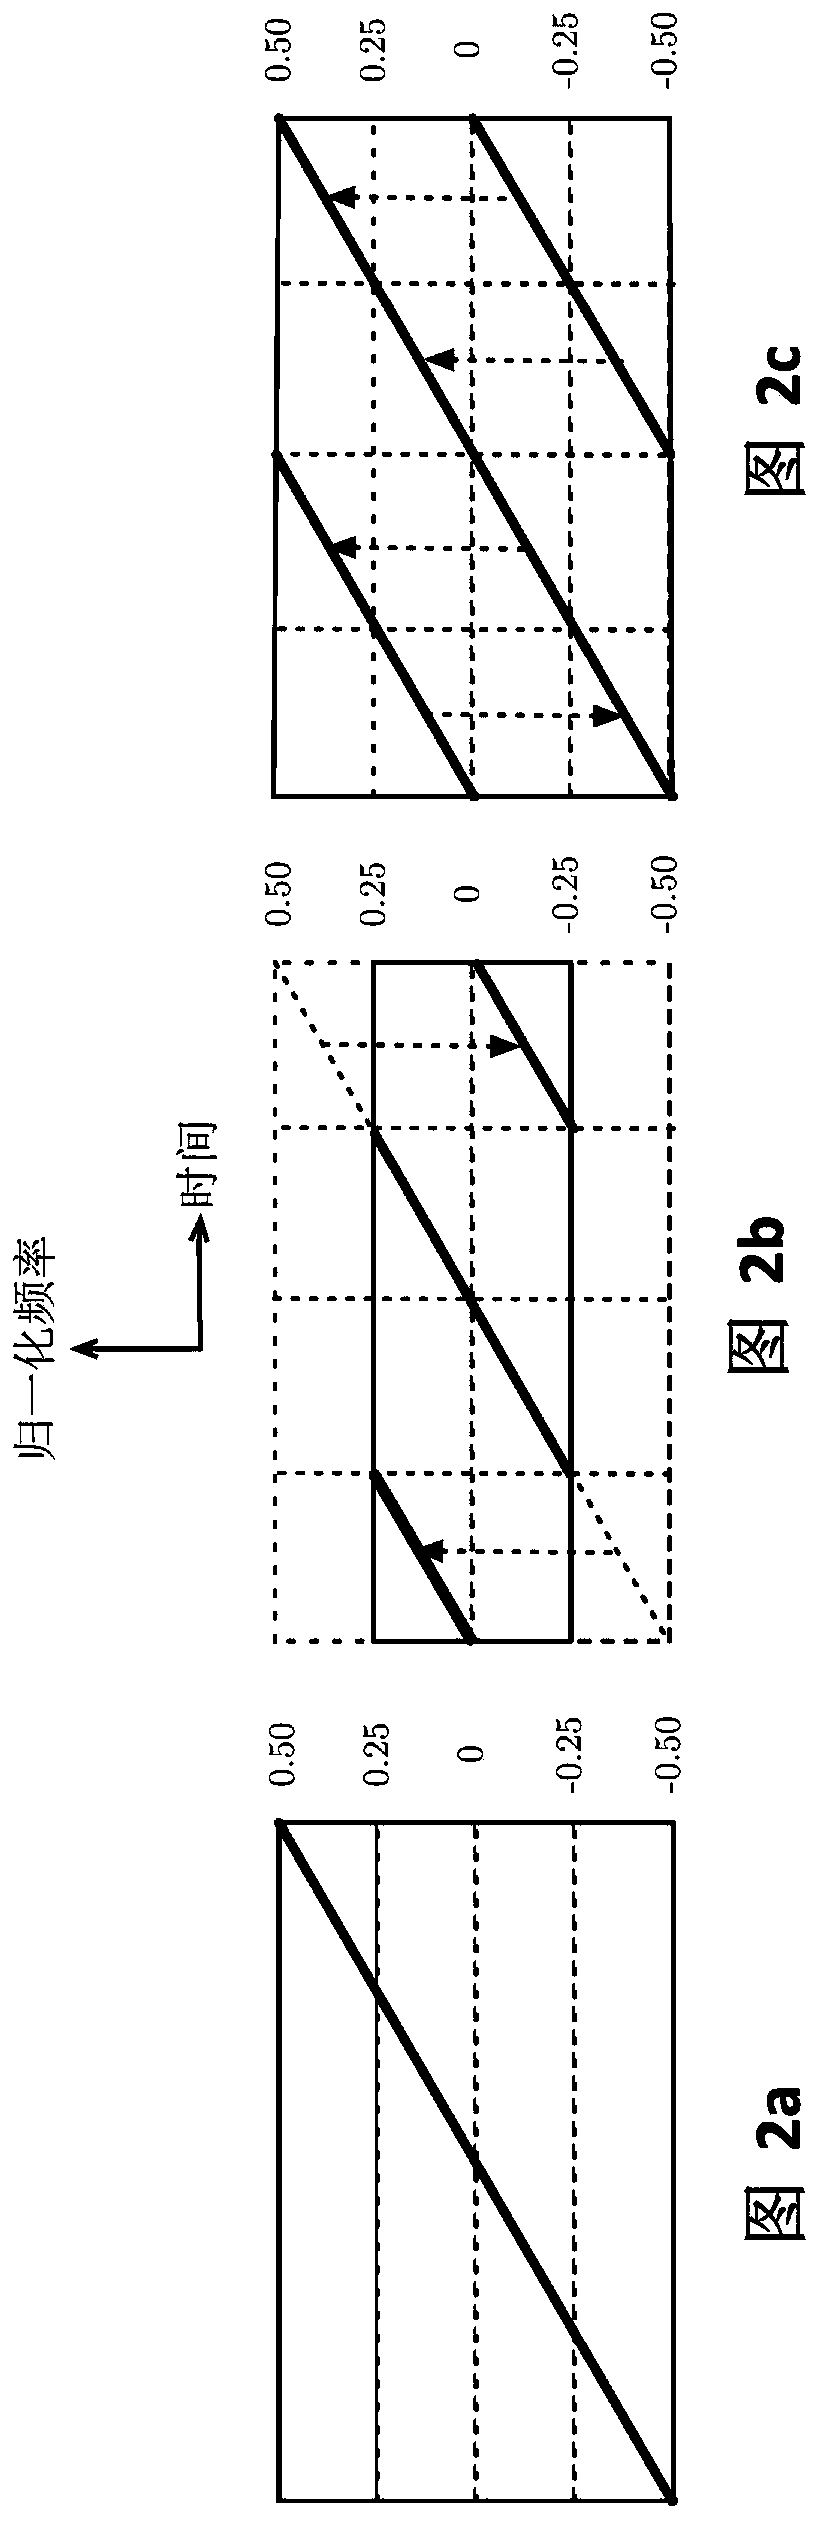 A method of analyzing linear frequency modulated signal